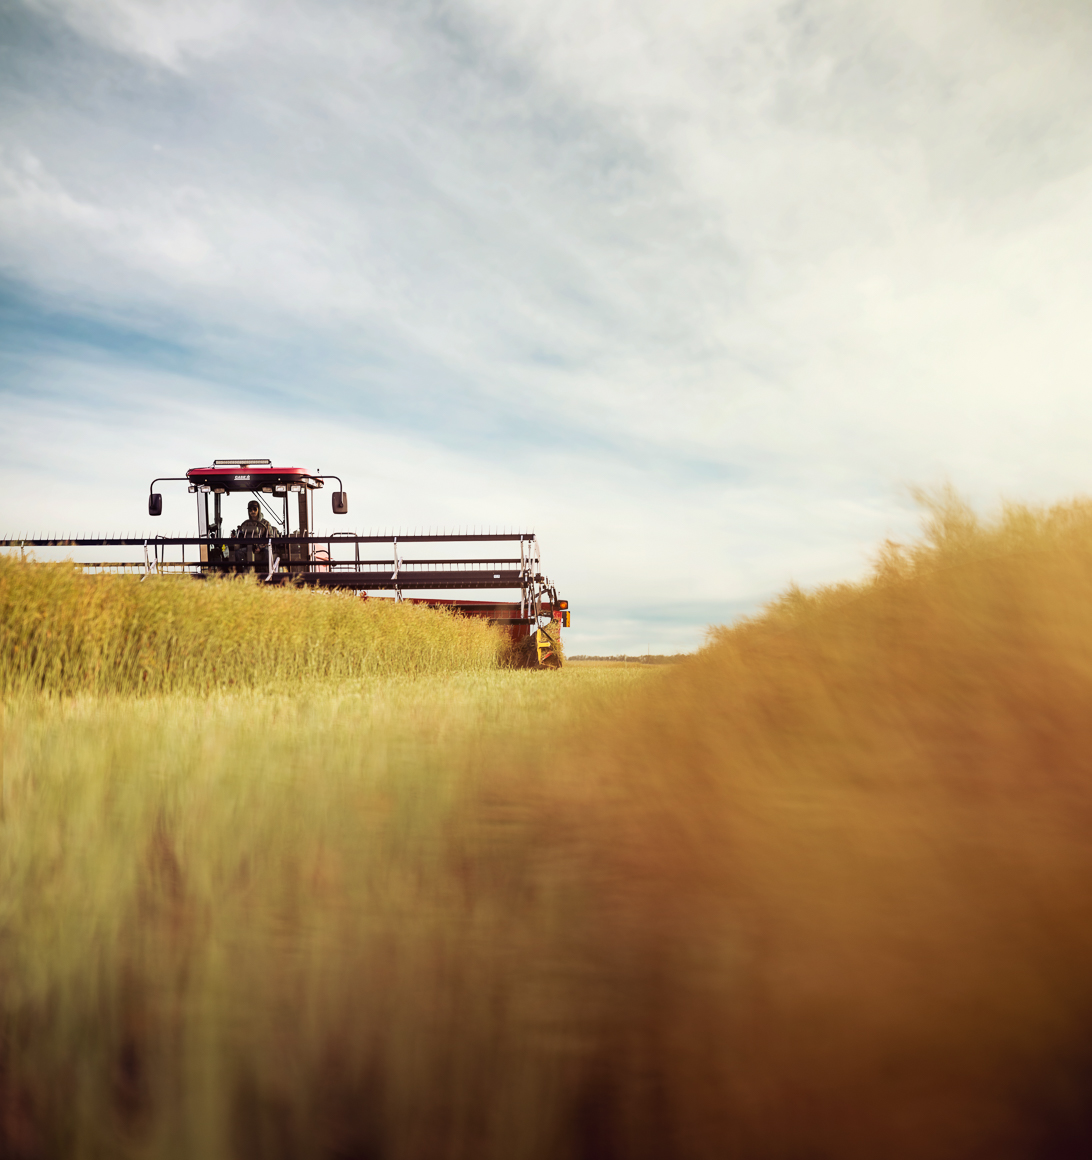 Shell Rotella | Agriculture Canola Harvest | Michael Kunde Photo